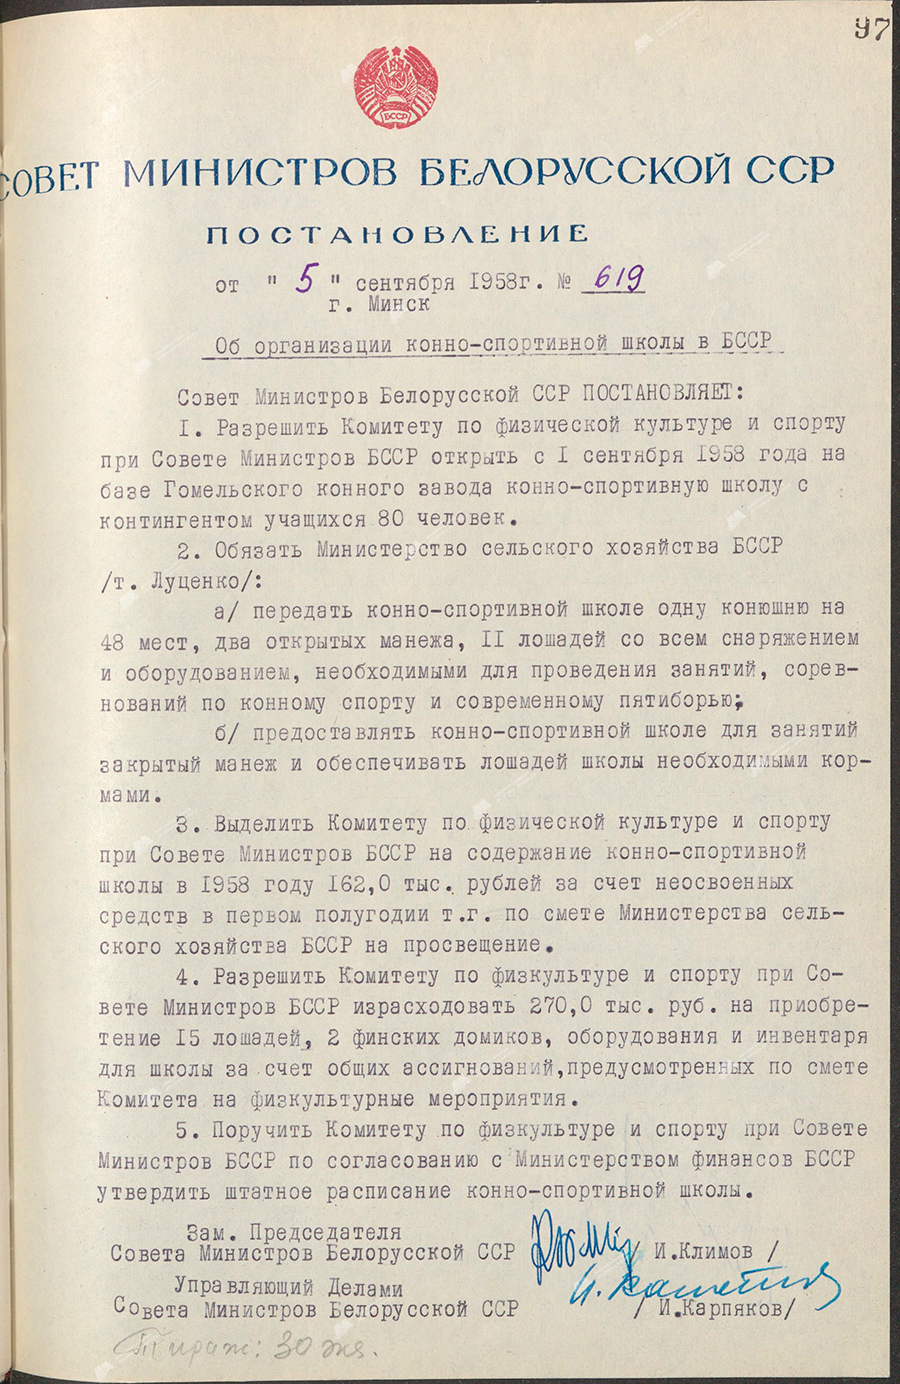 Resolution No. 619 of the Council of Ministers of the BSSR «On the organization of an equestrian school in the BSSR»-стр. 0